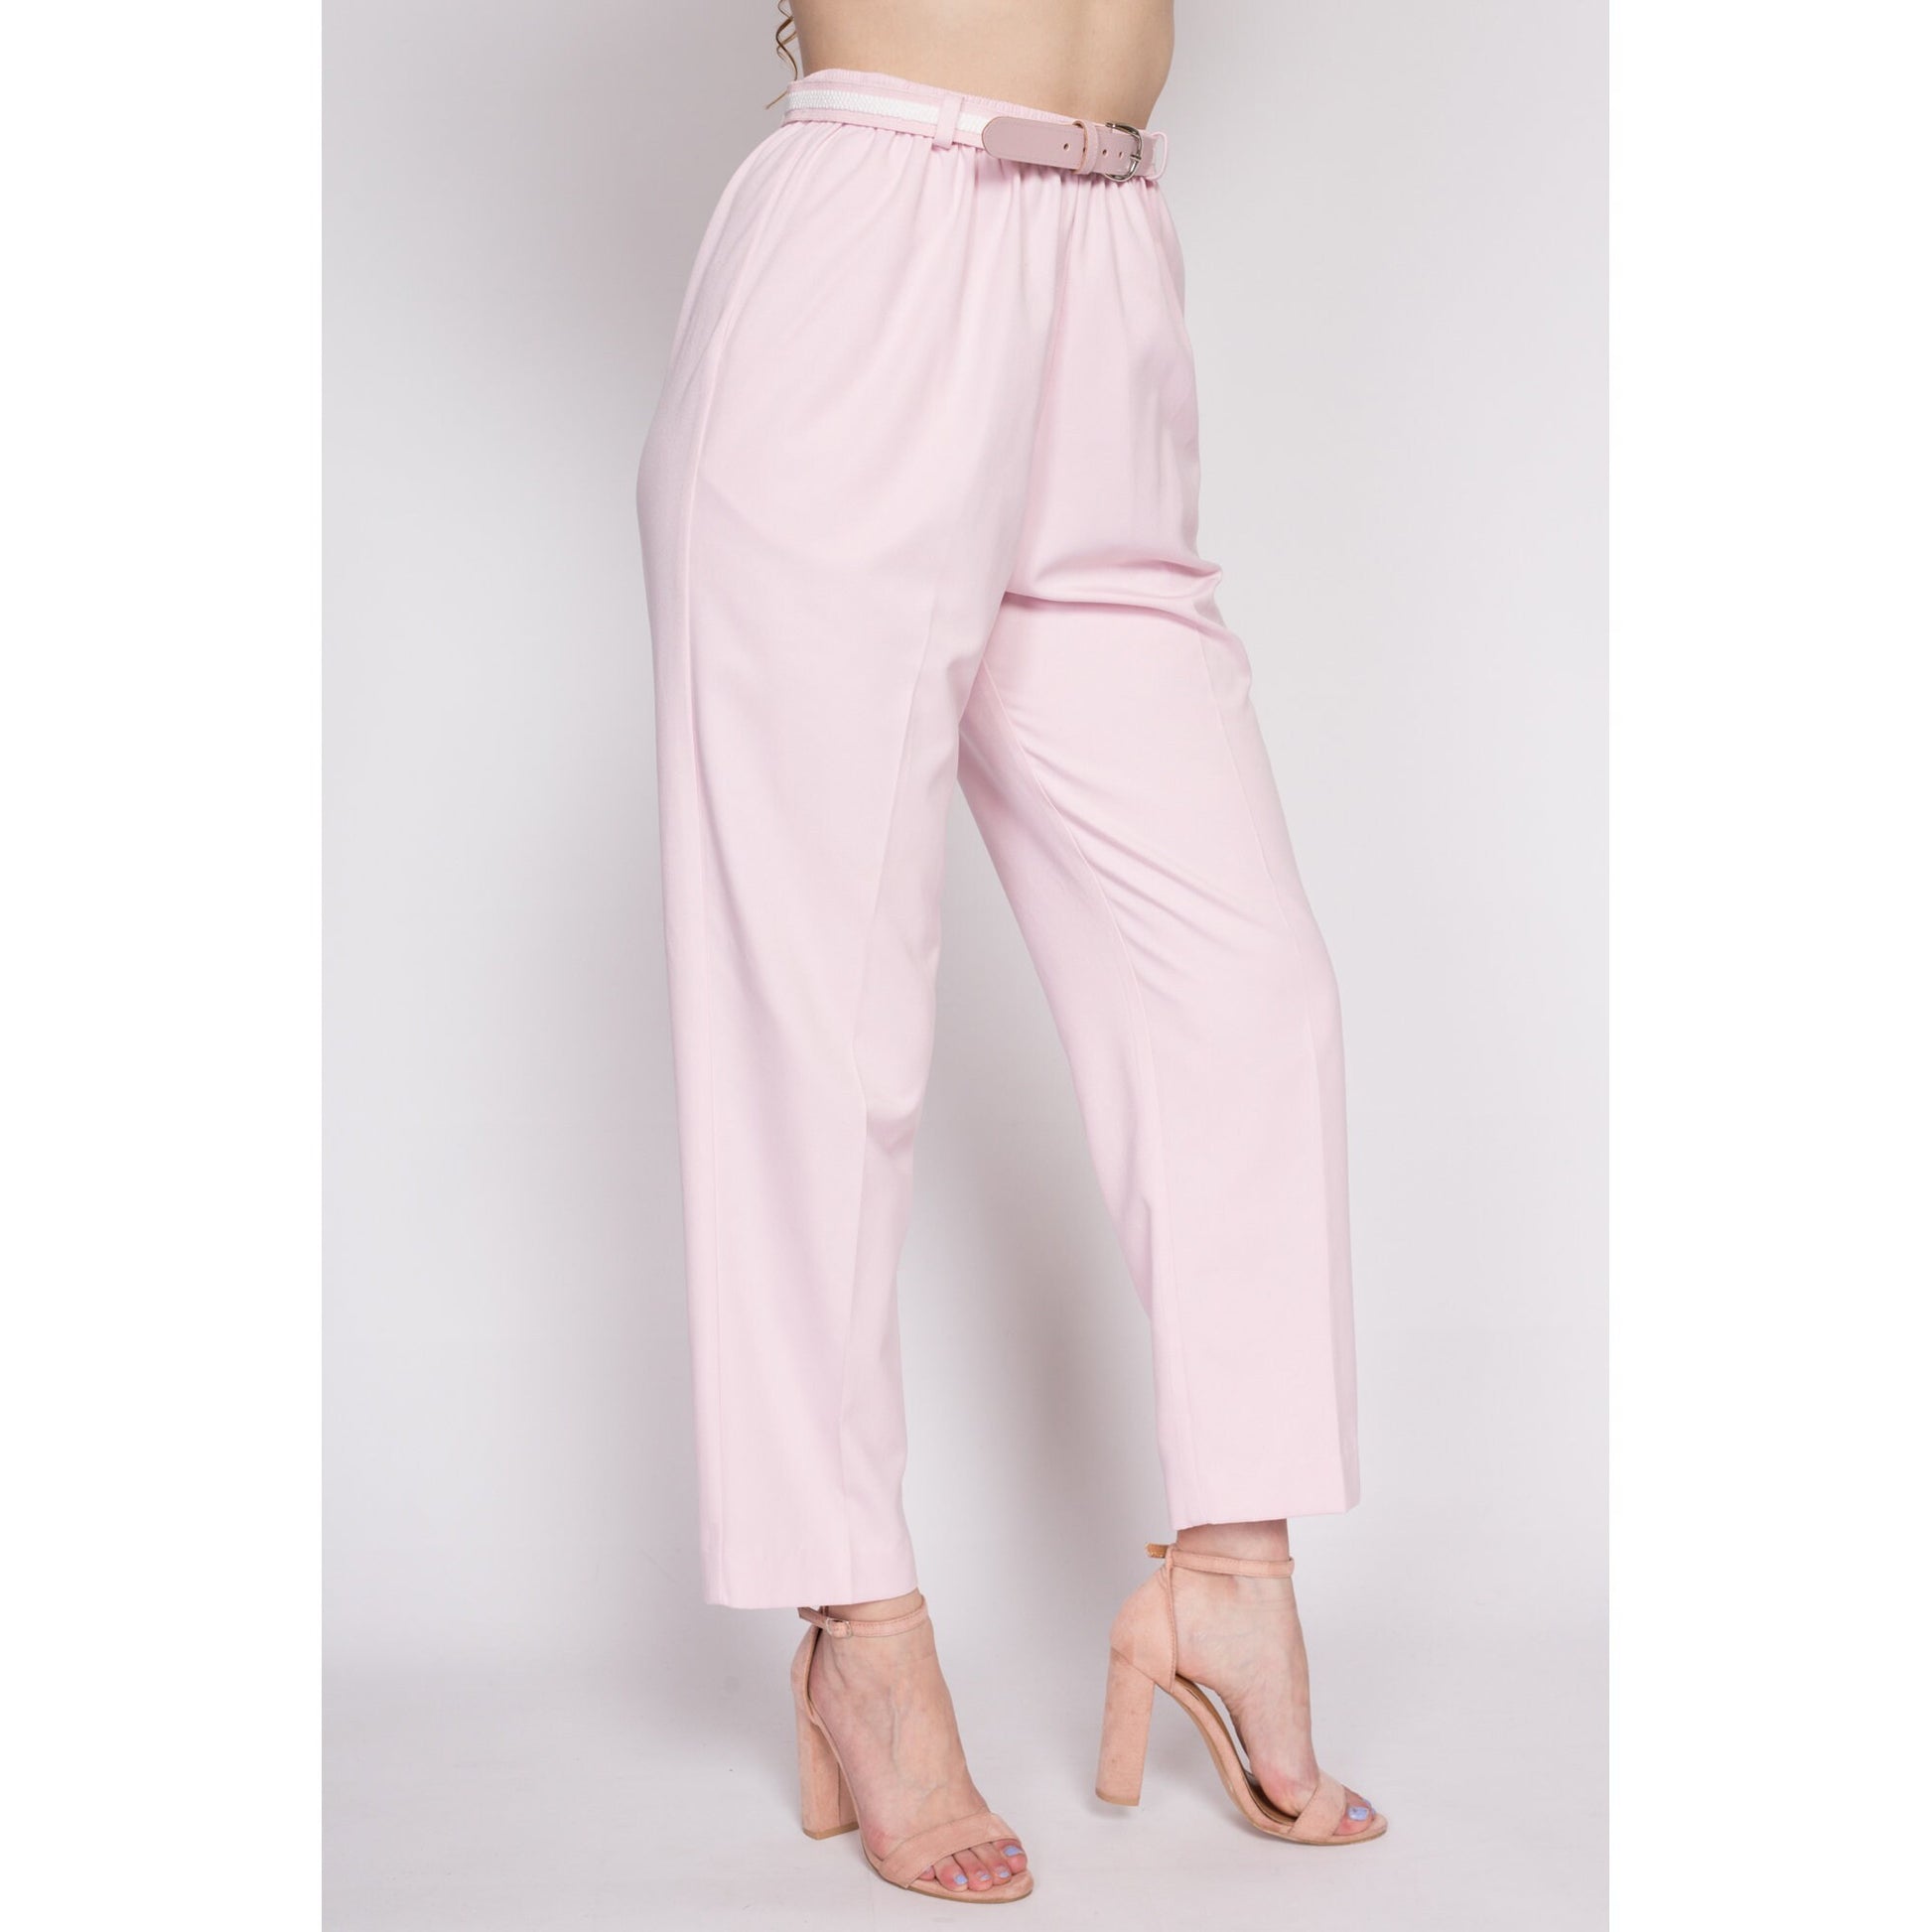 M| 80s Pink High Waist Belted Pants - Medium | Vintage Tapered Leg Elastic Casual Trousers